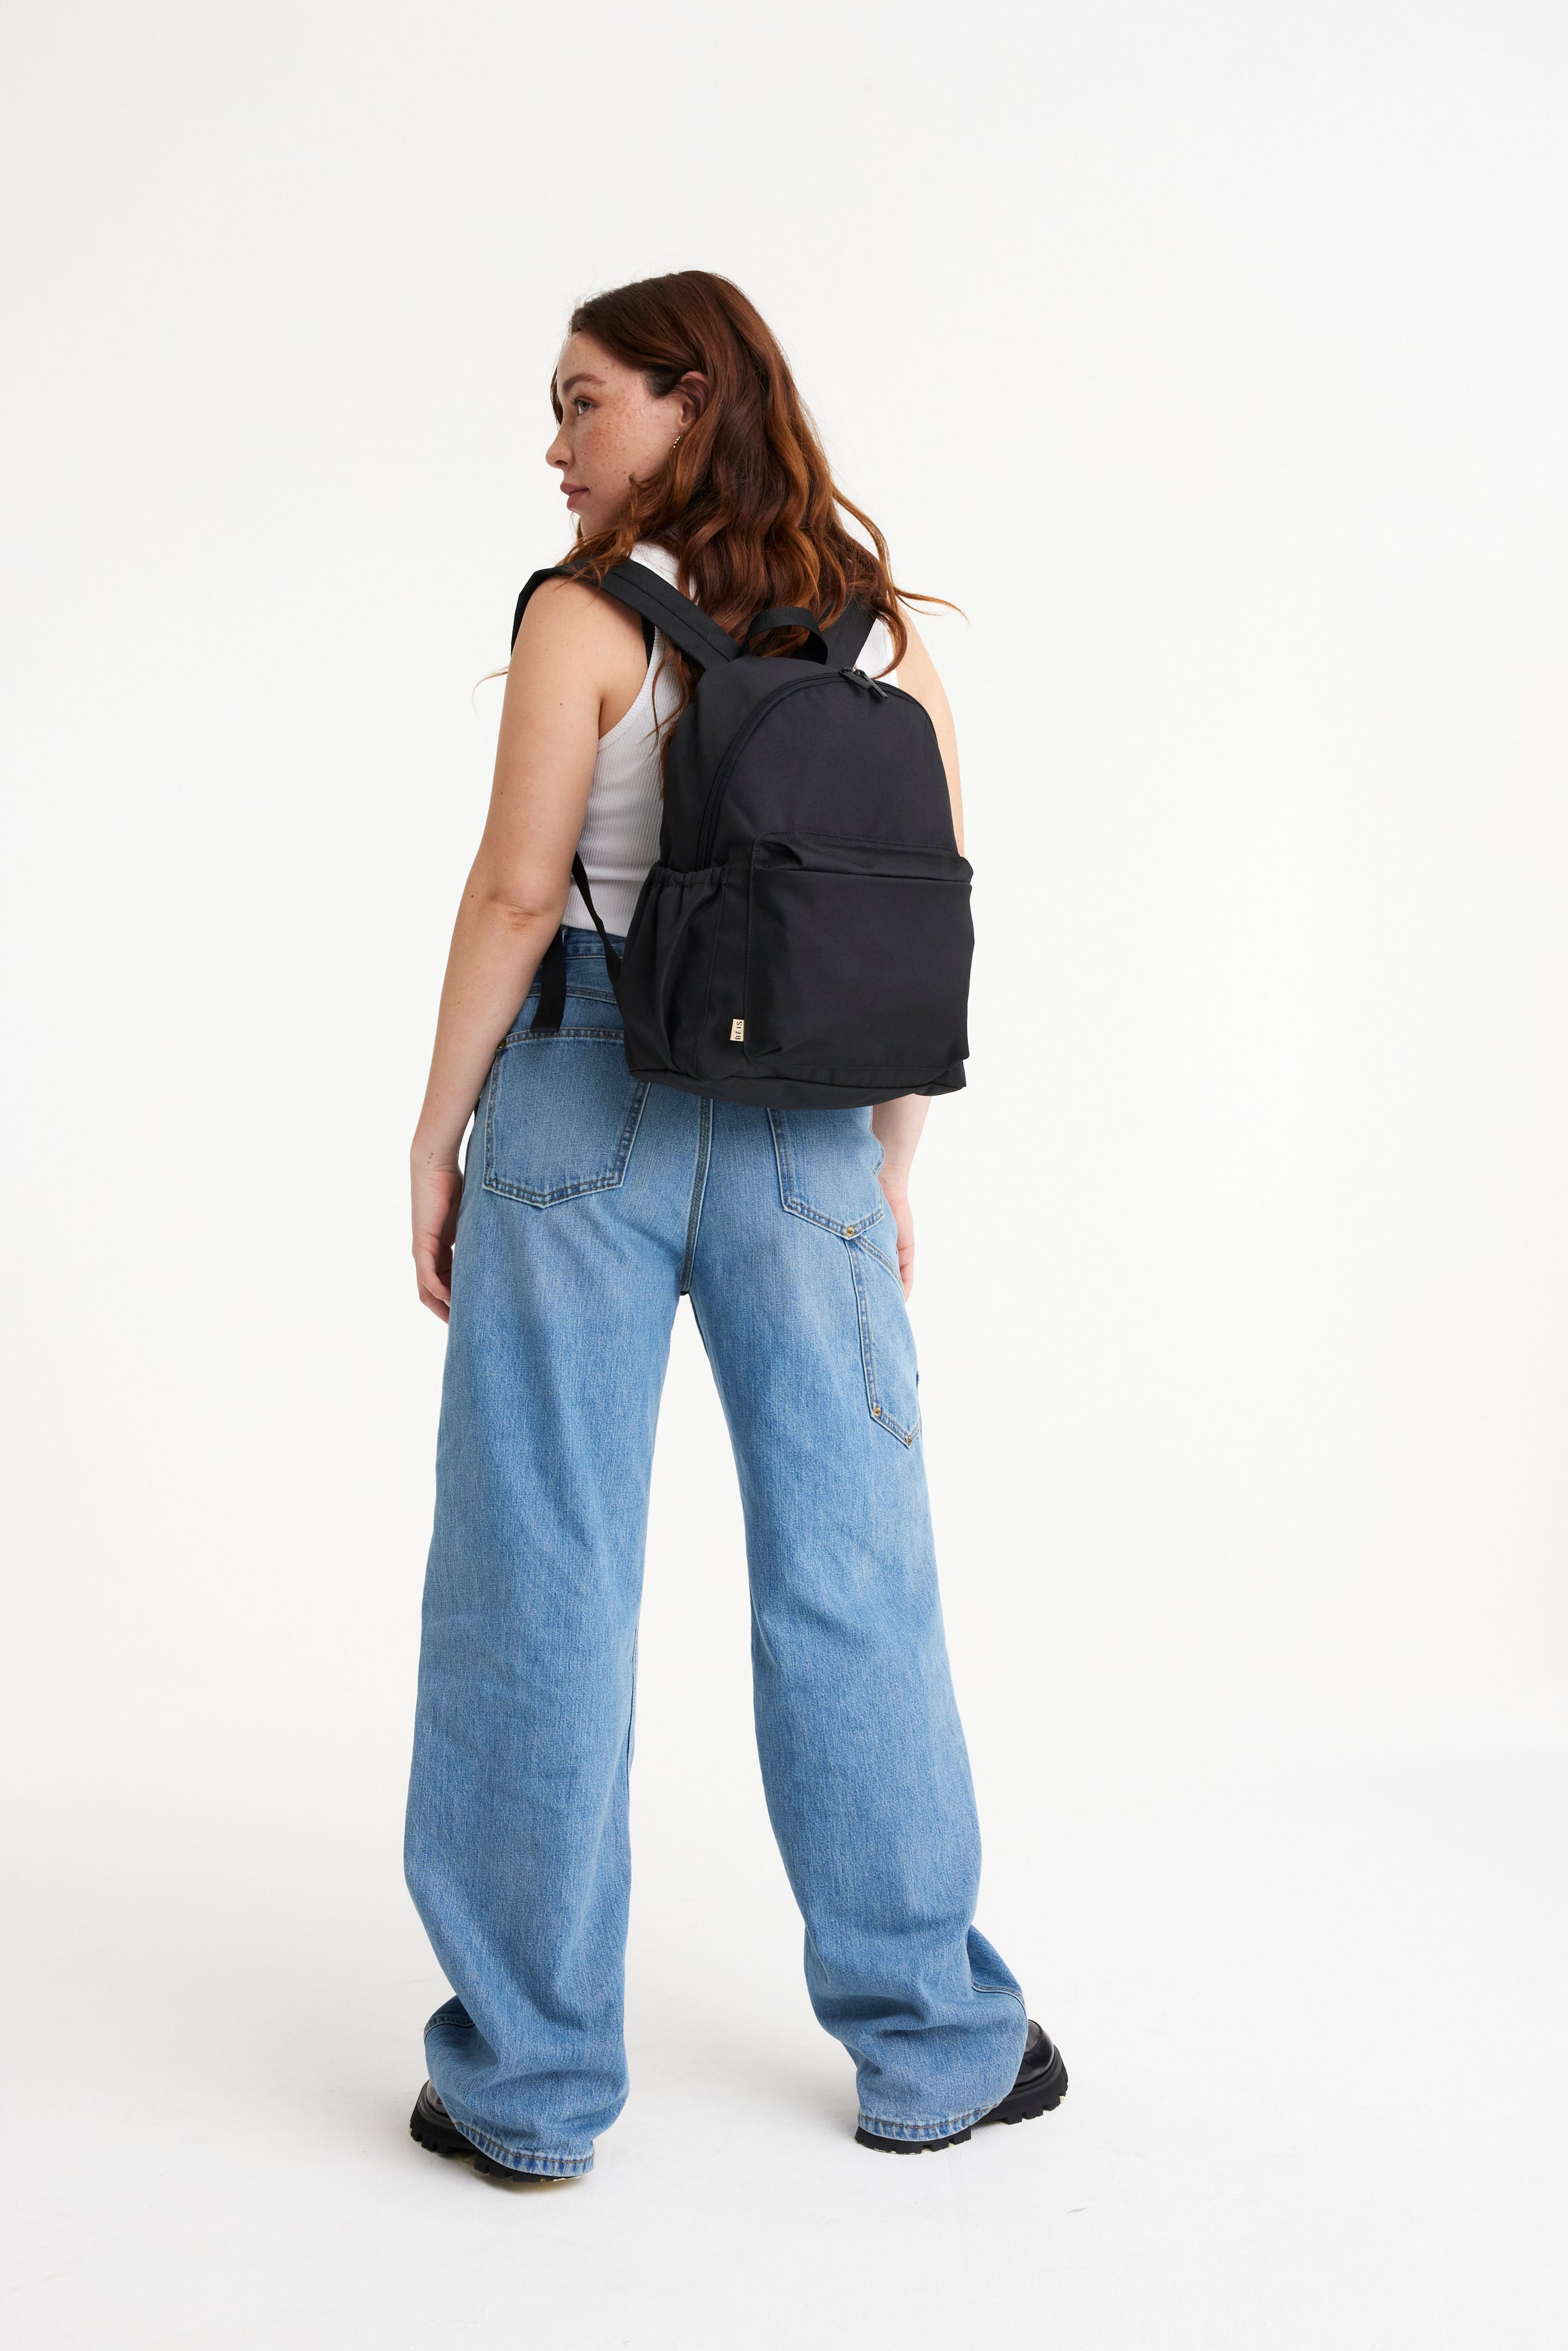 BÉIS 'The BEISICS Backpack' in Black - Backpack For Work & Travel With ...